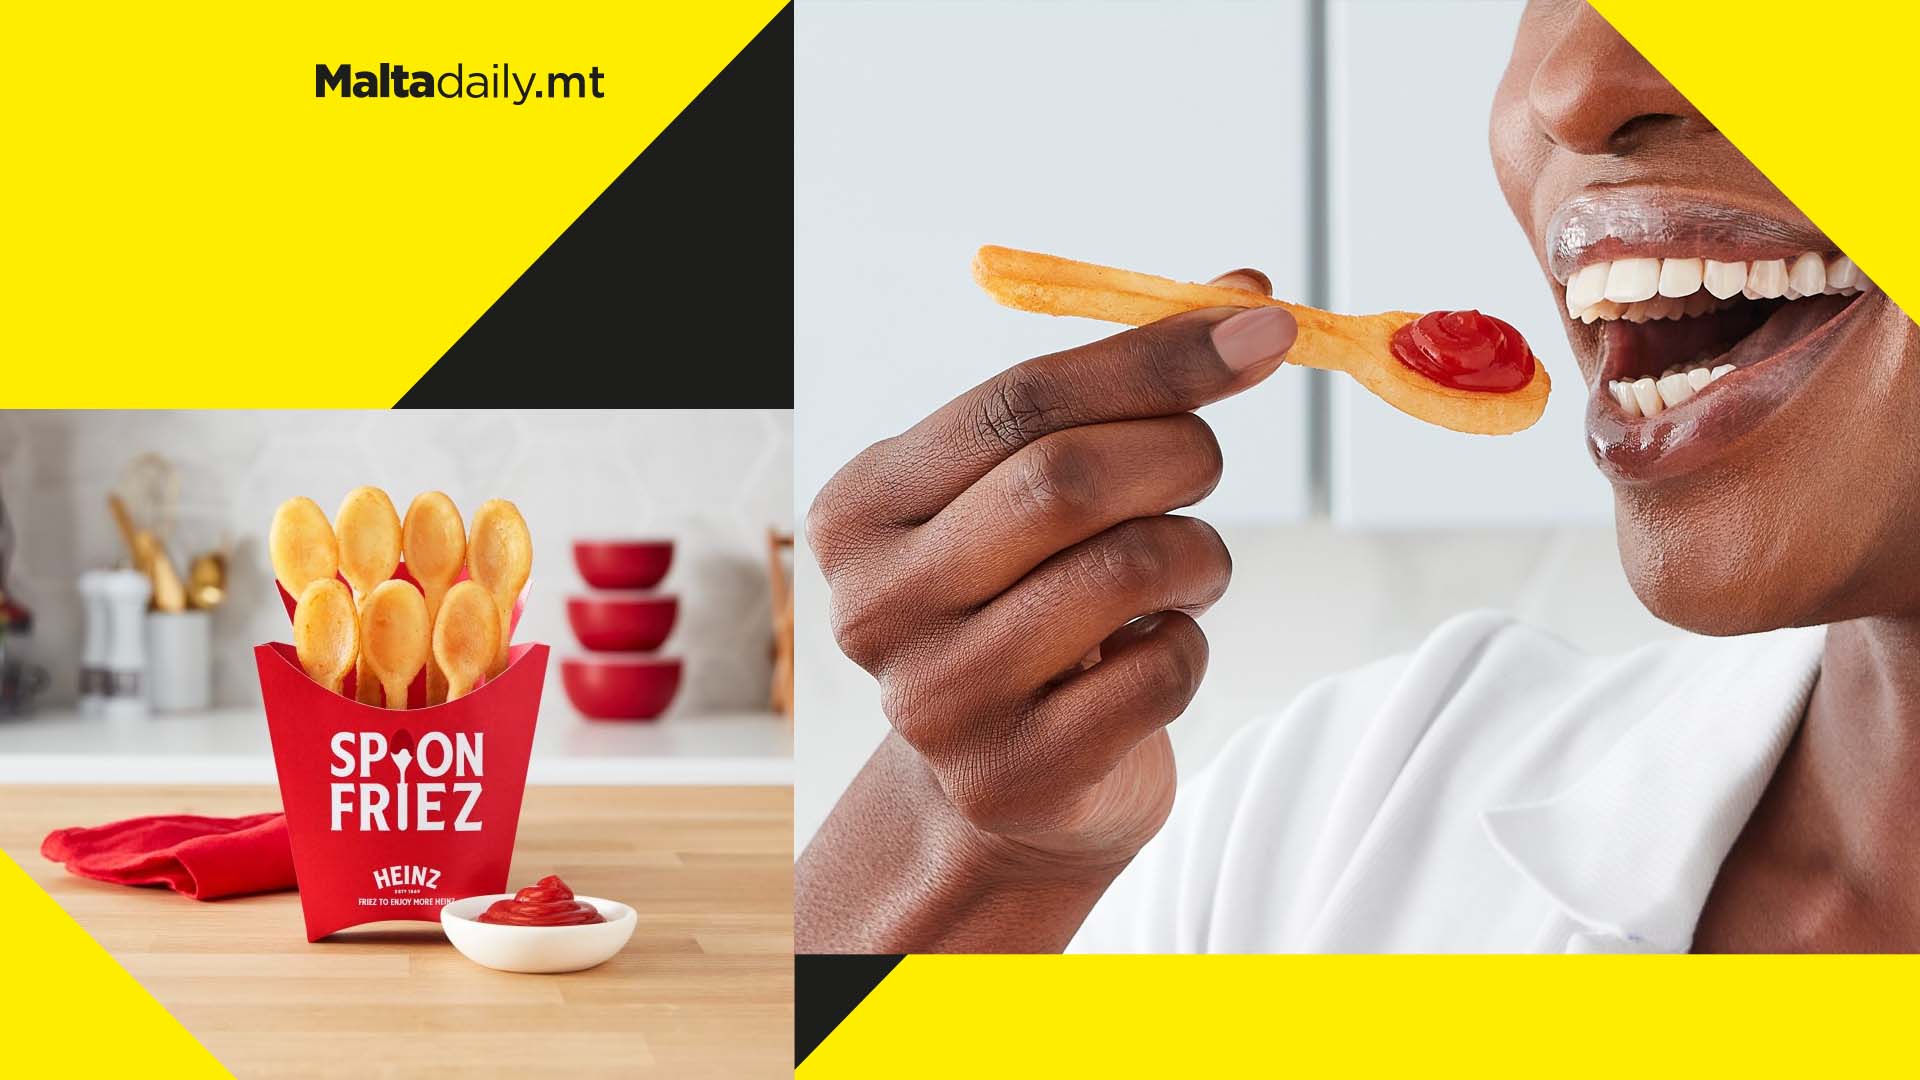 Heinz introduce “Spoon Friez” to ensure the perfect fry-to-ketchup ratio